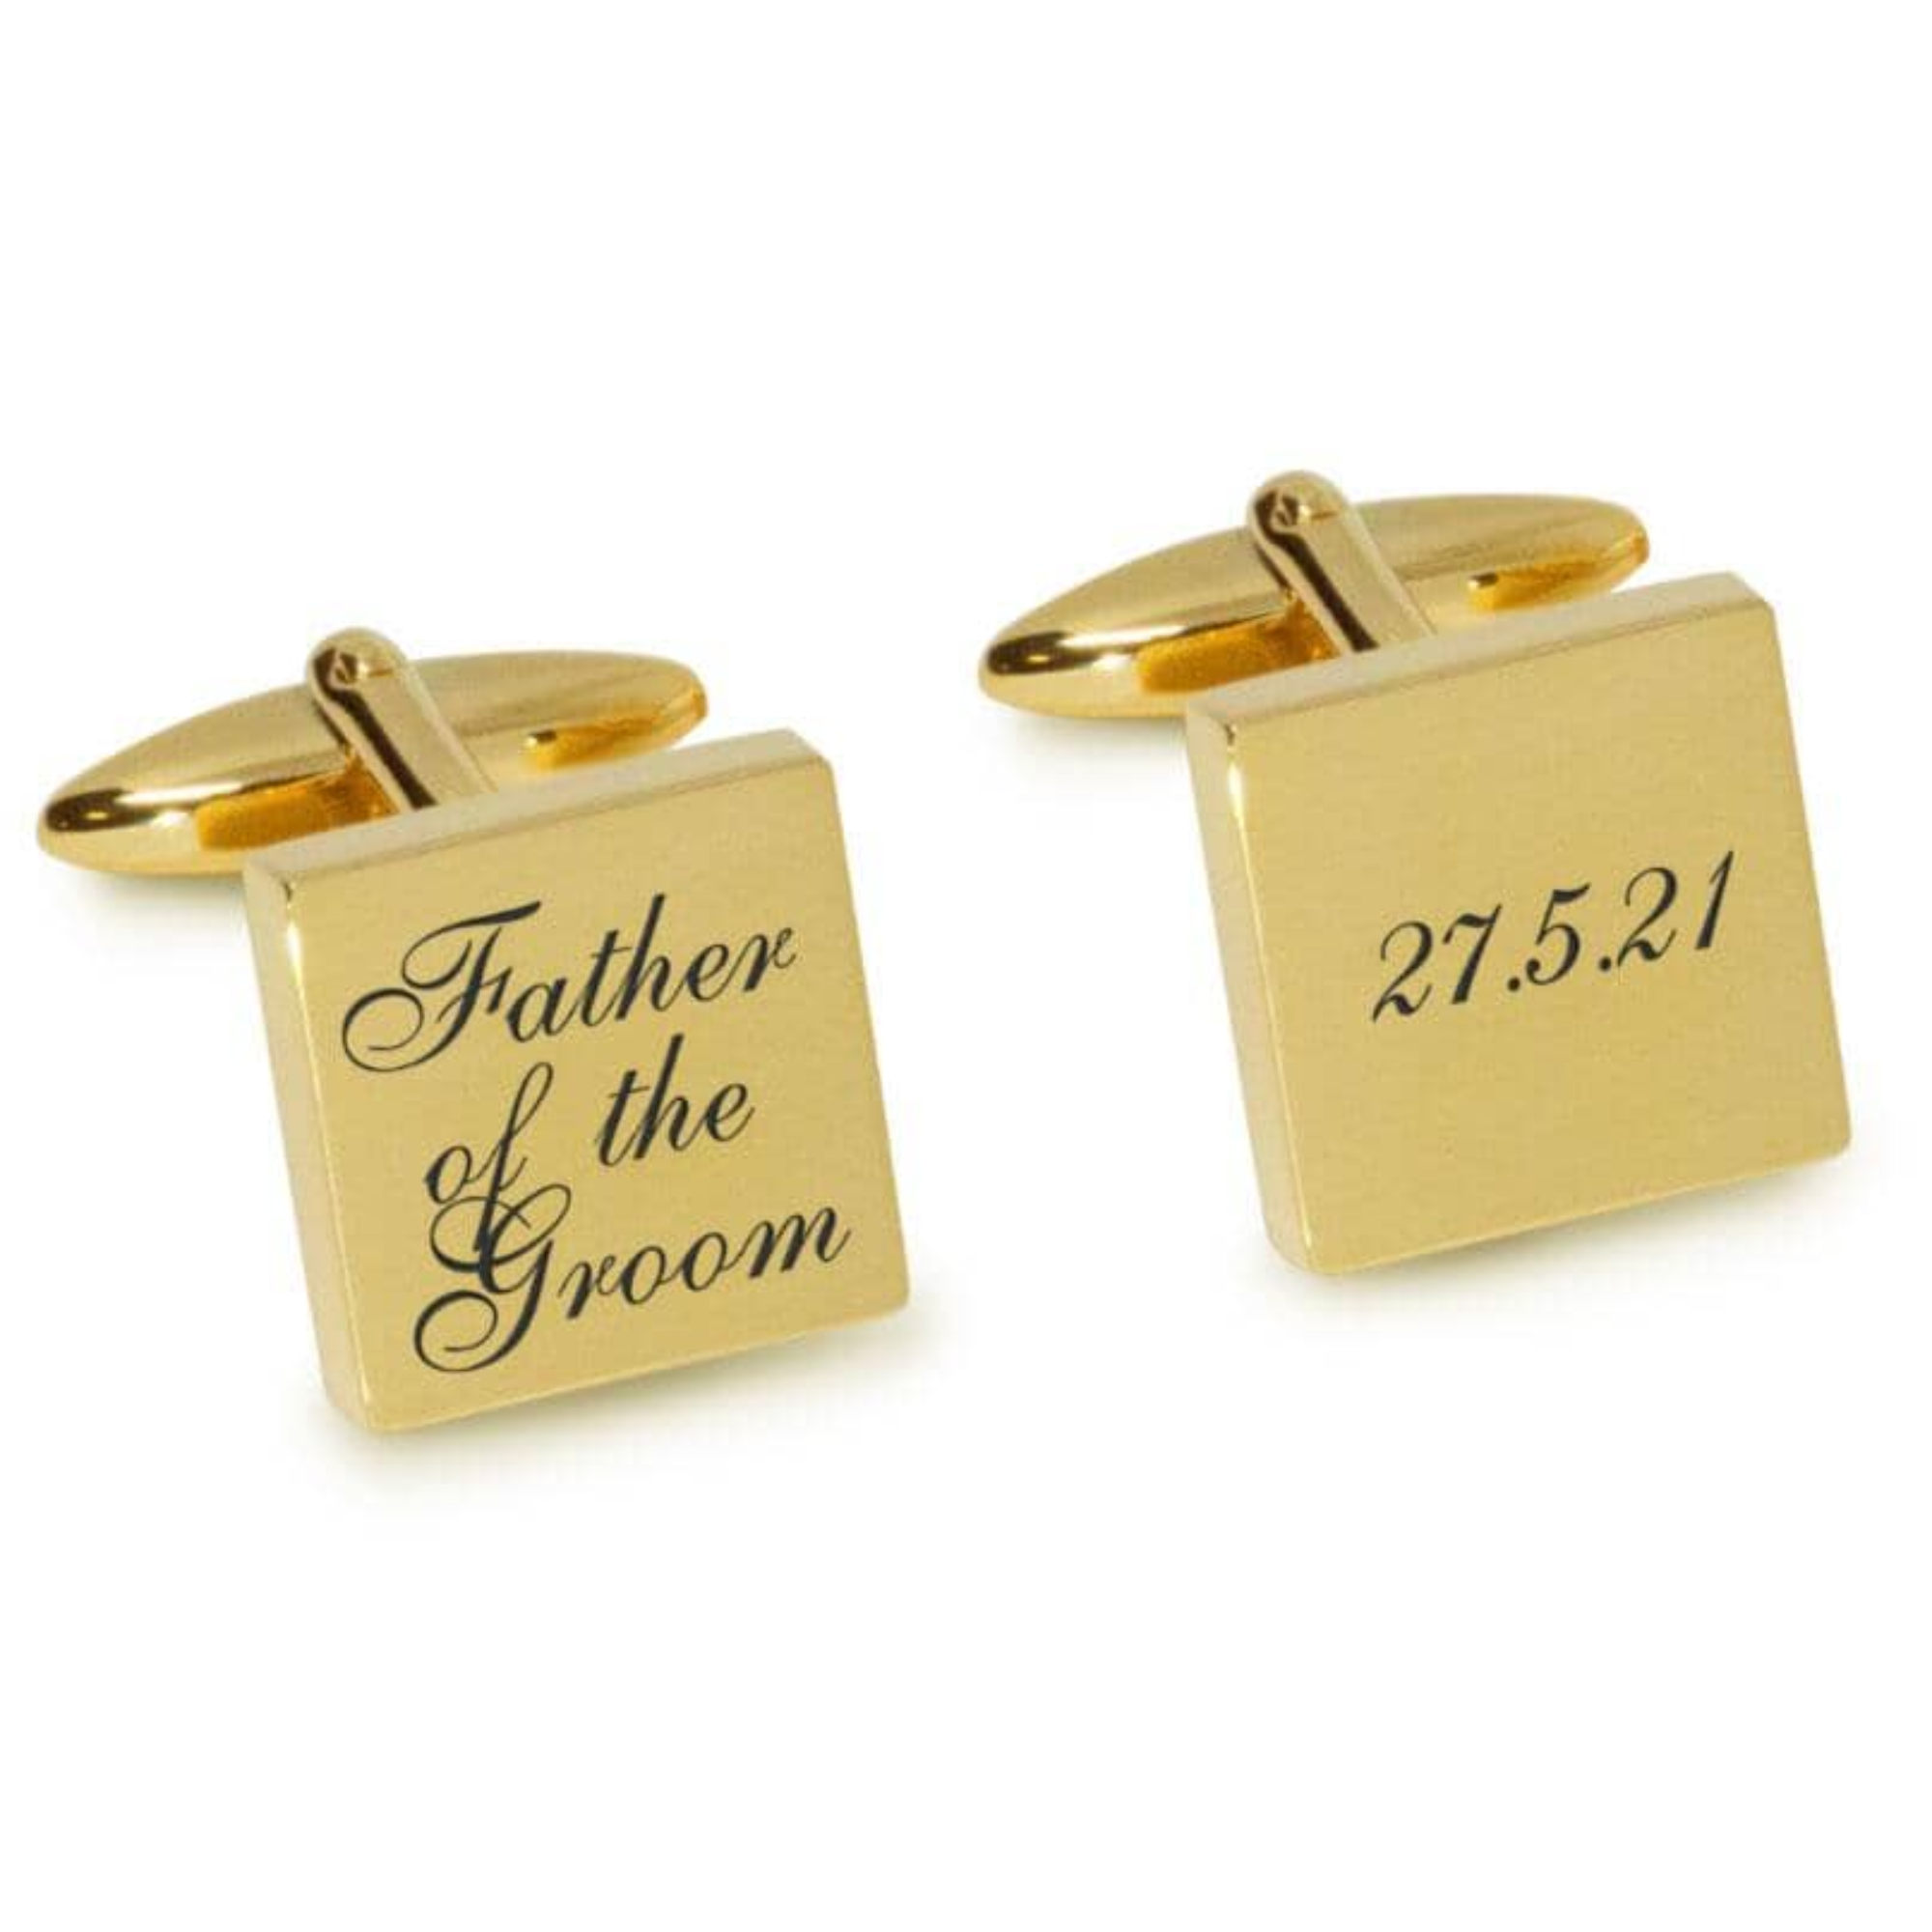 Father of the Groom Wedding Date Engraved Cufflinks in Gold